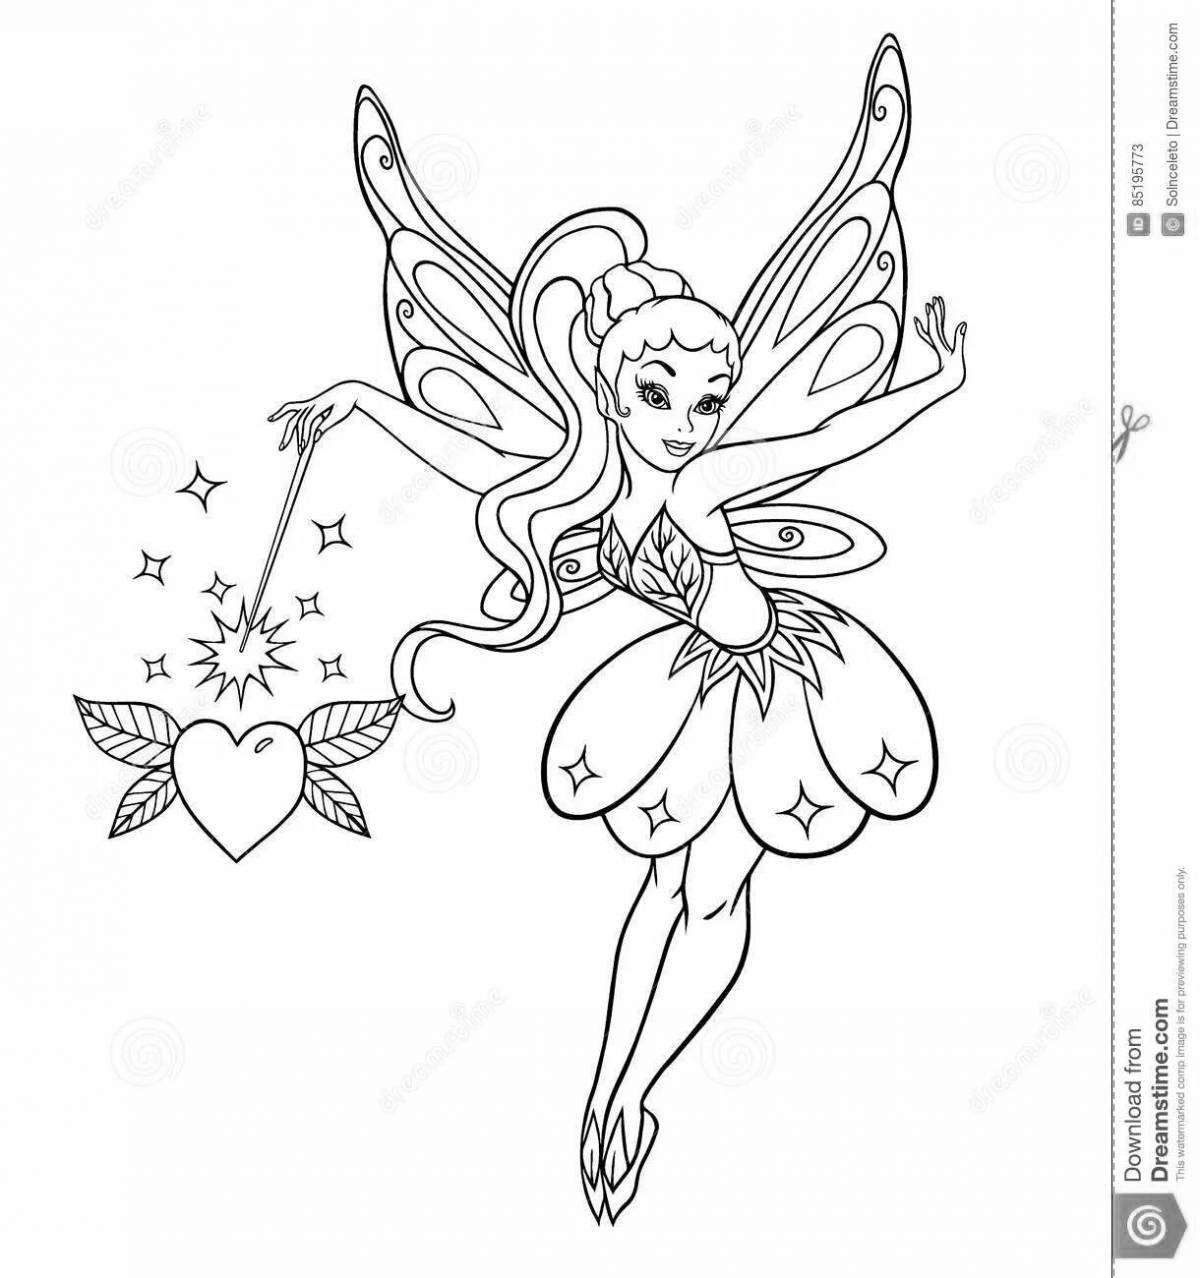 Shining fairy coloring book